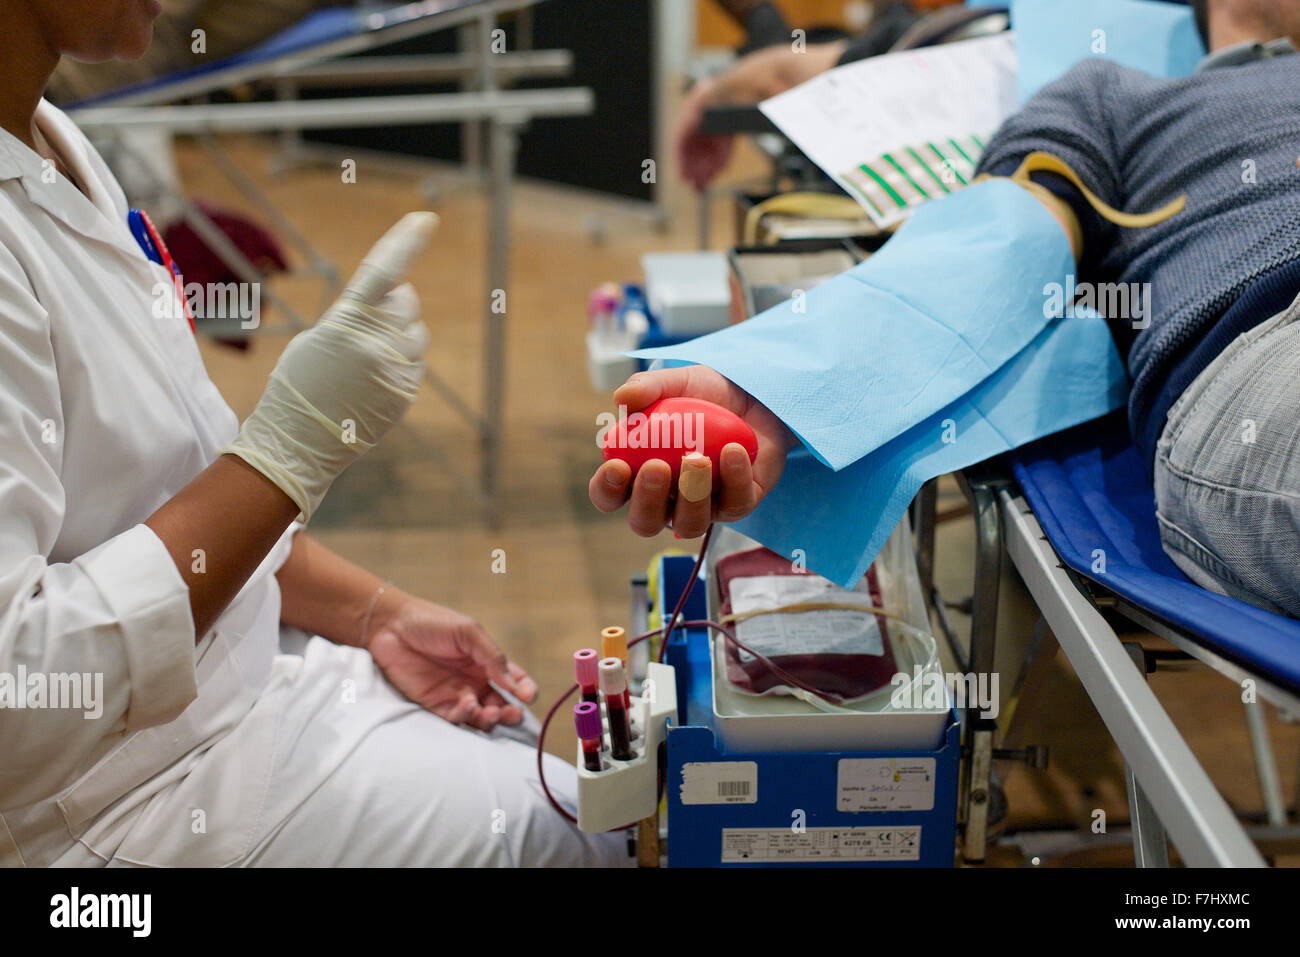 Person donating blood, cropped Stock Photo